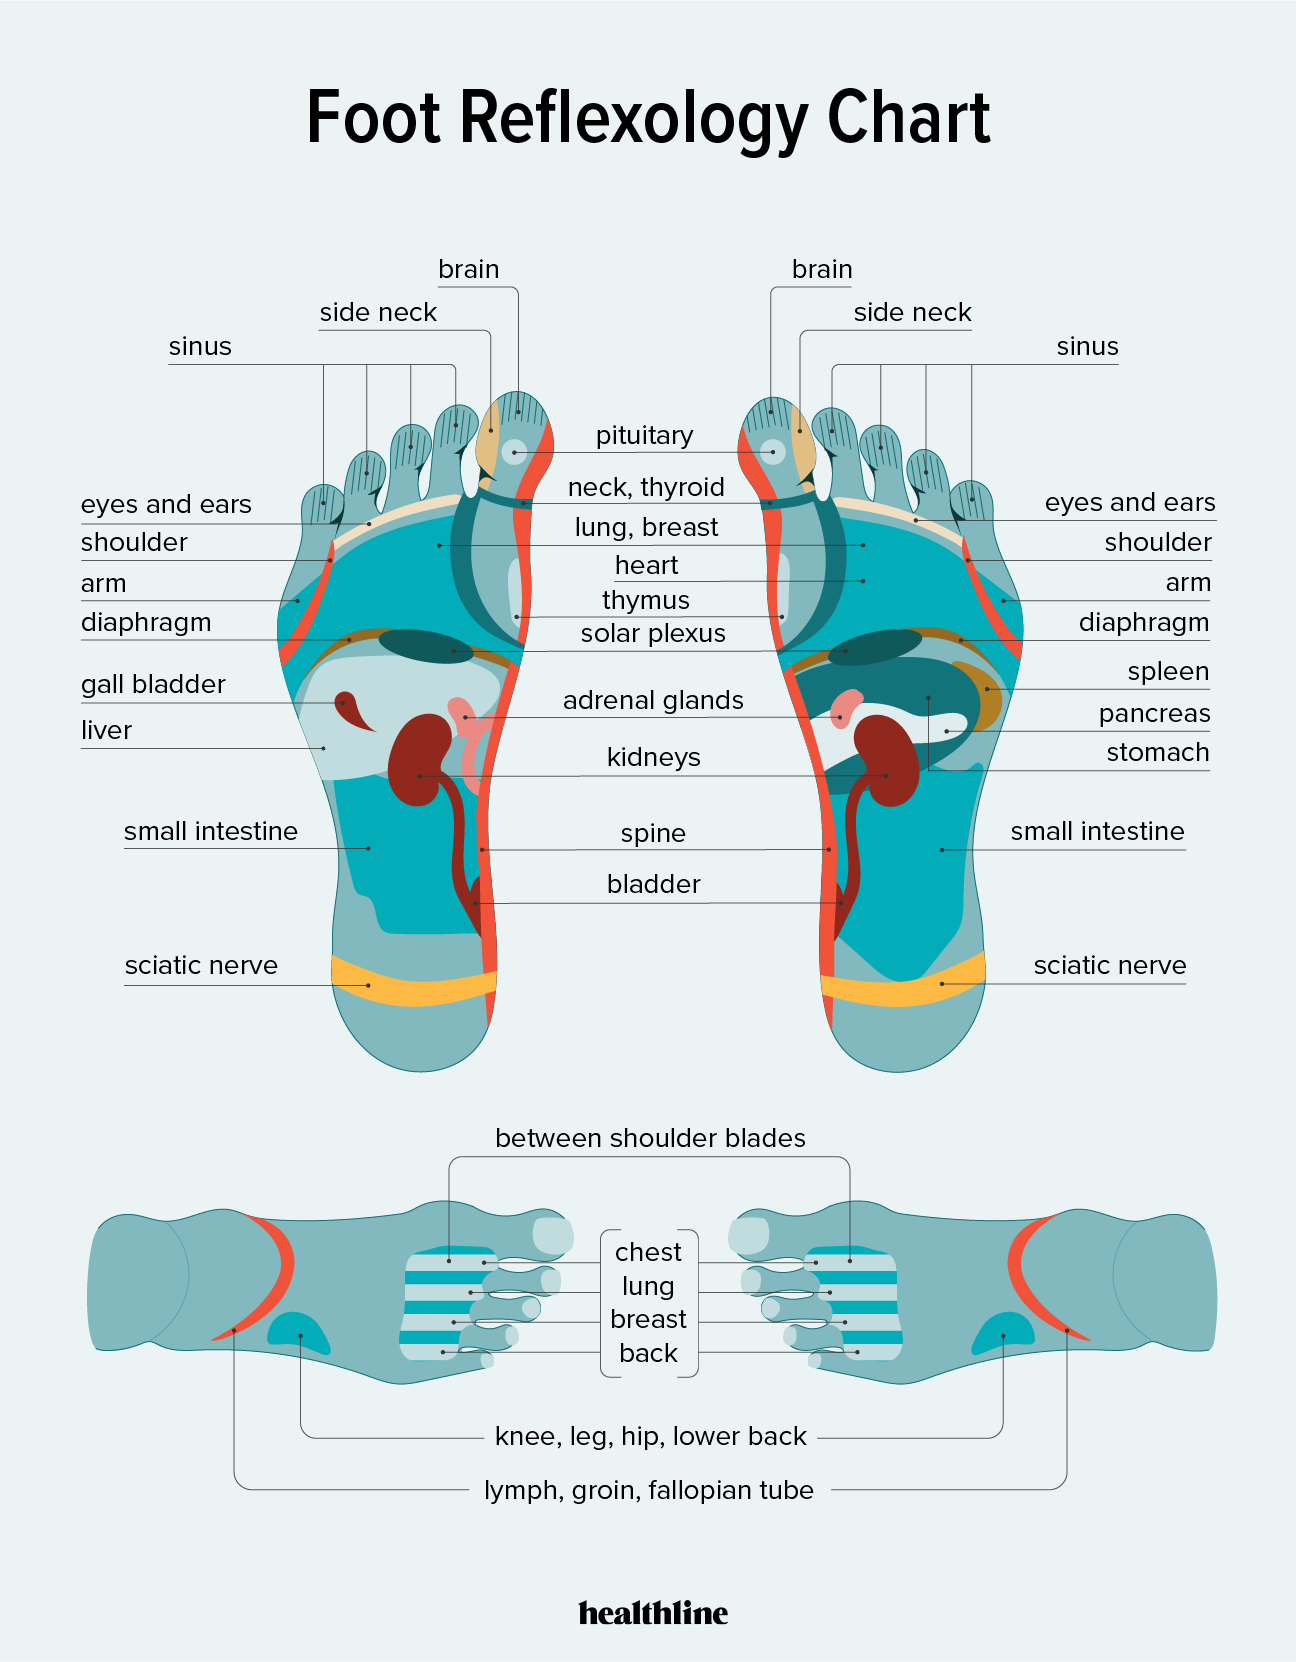 foot-reflexology-chart-points-how-to-benefits-and-risks-bob